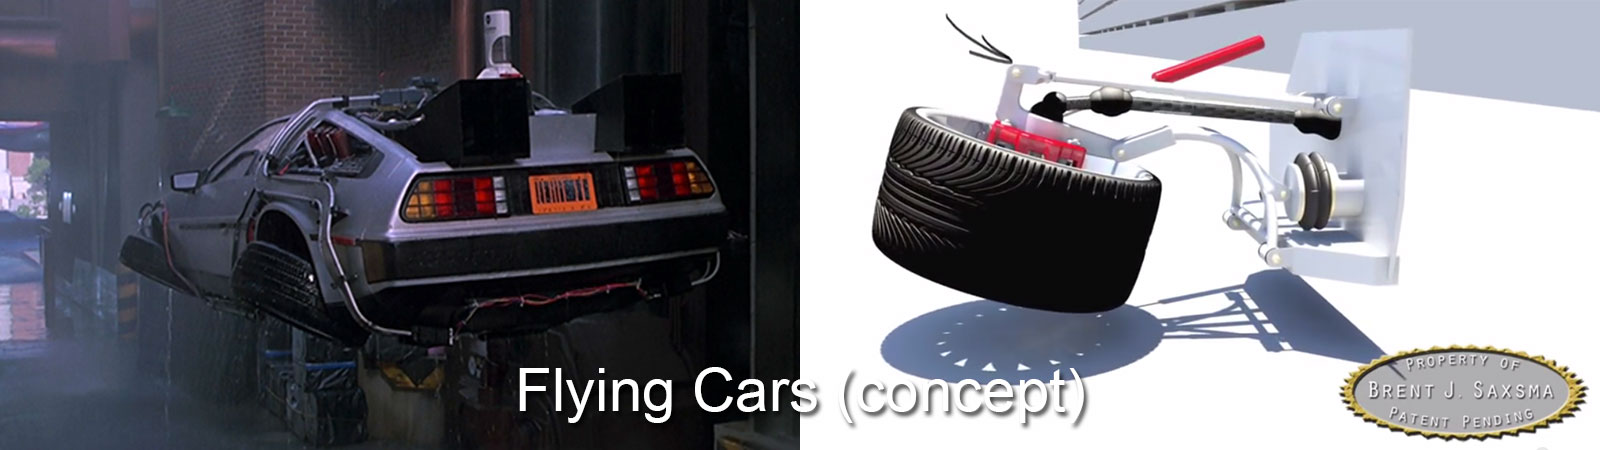 Back to the Future II vs. 2015 The Reality